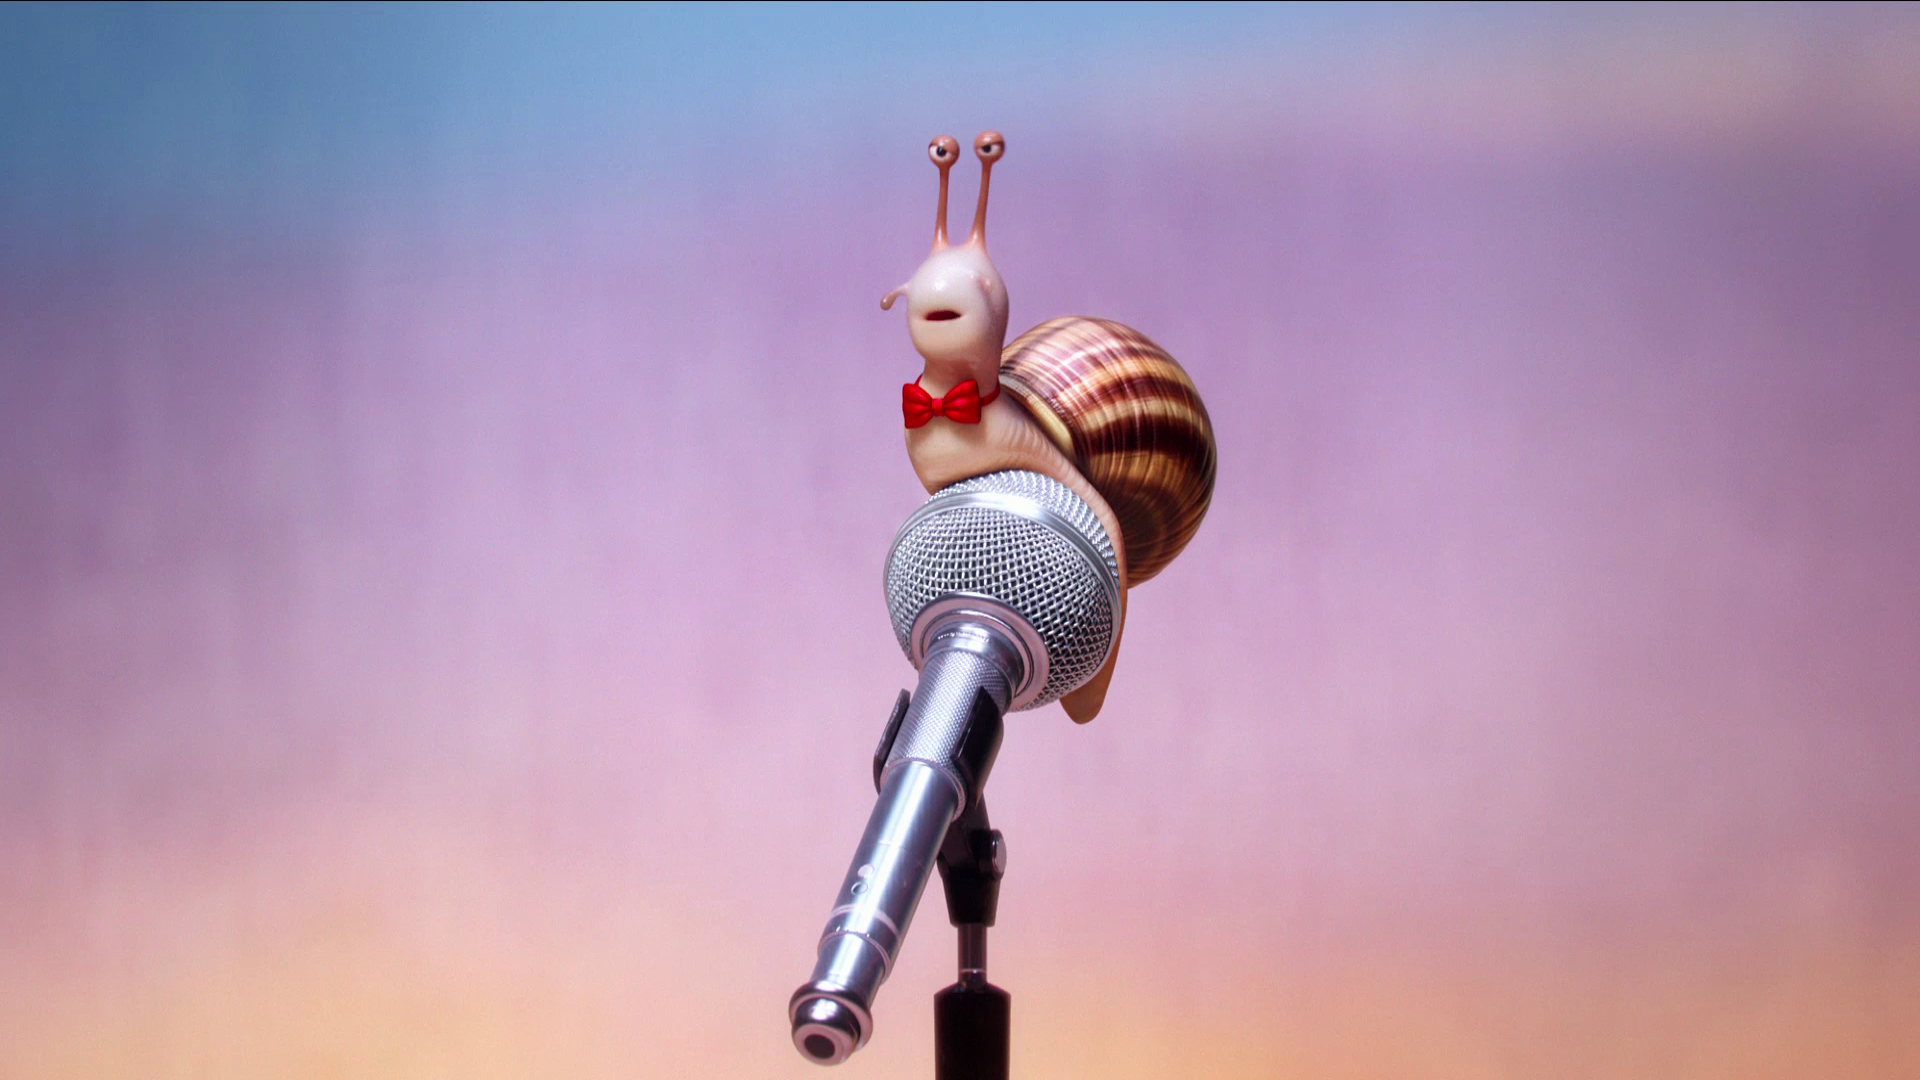 A snail auditions for the singing role